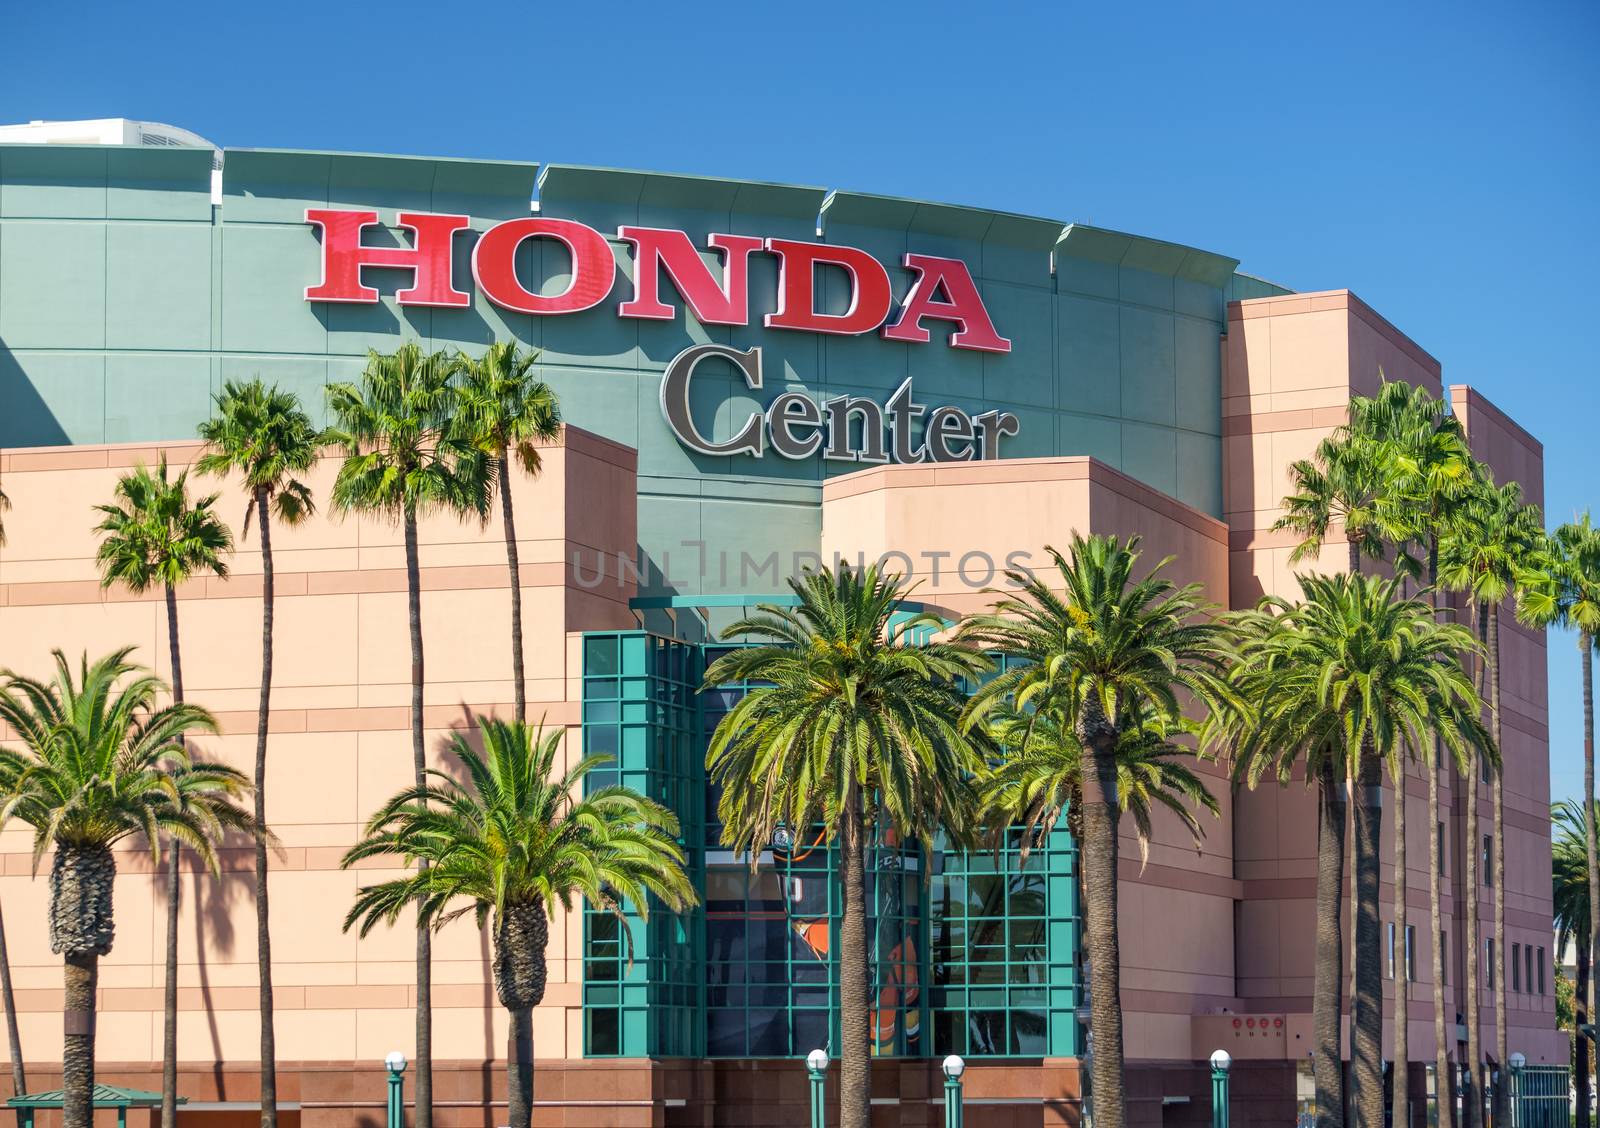 ANAHEIM, CA/USA - OCTOBER 10, 2015: Honda Center exterior view. The Honda Center is an indoor arena and home of the Anaheim Mighty Ducks.